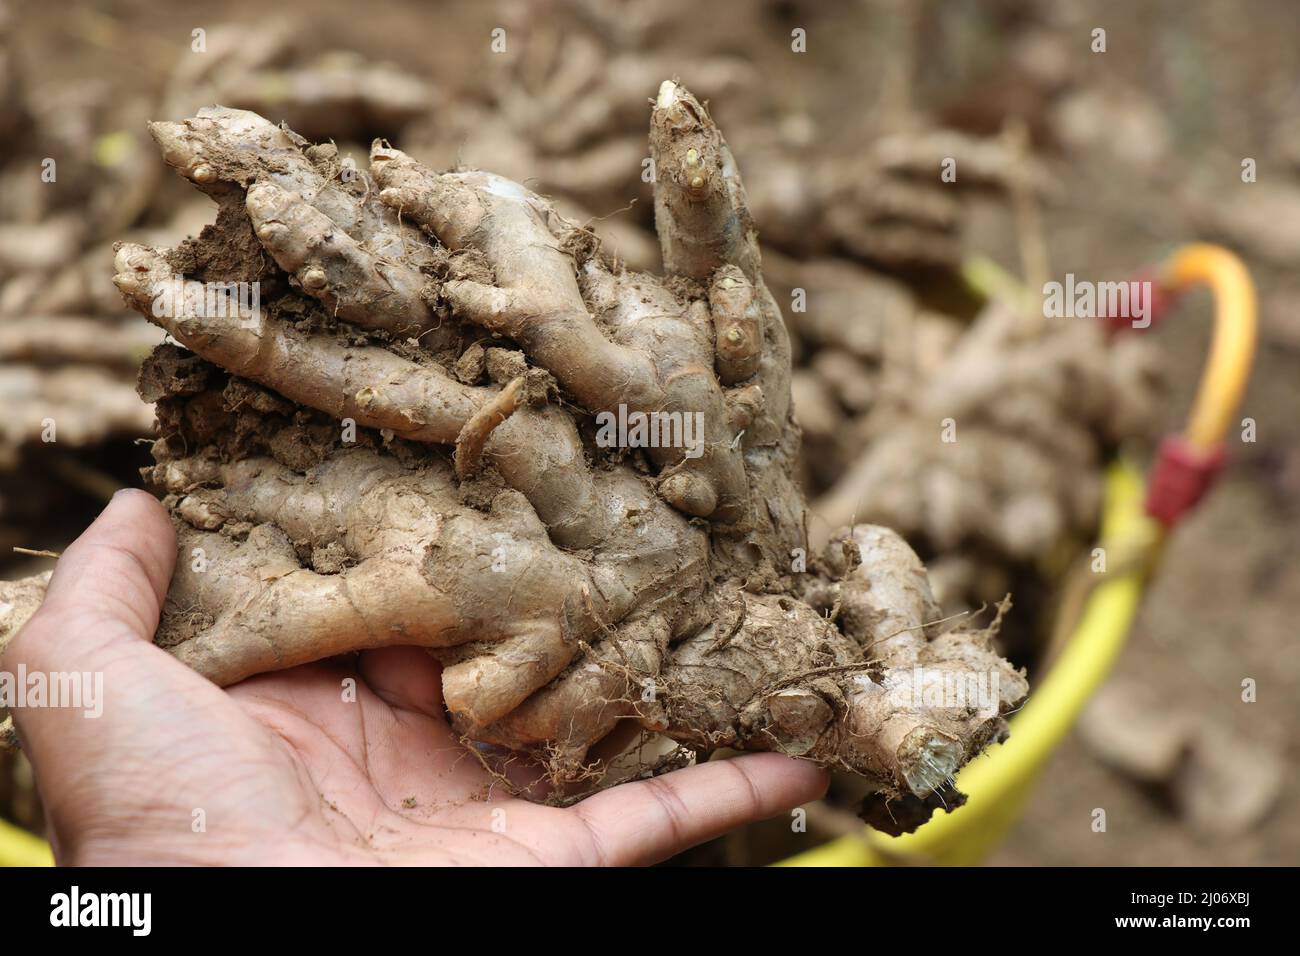 Fresh ginger root held in hand with basket in the background Stock Photo